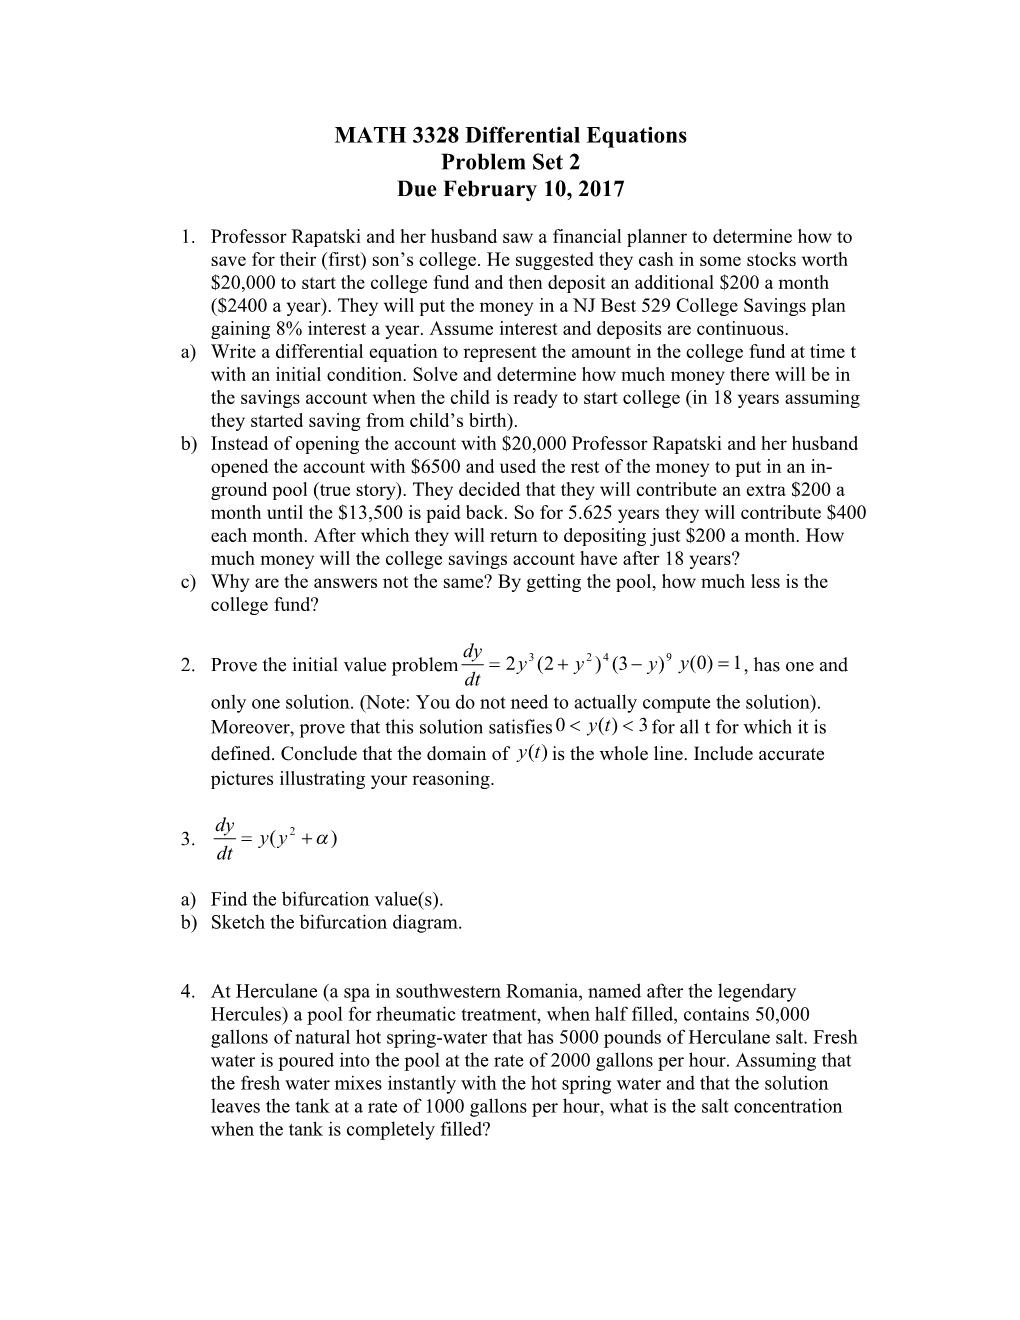 MATH 3328 Differential Equations